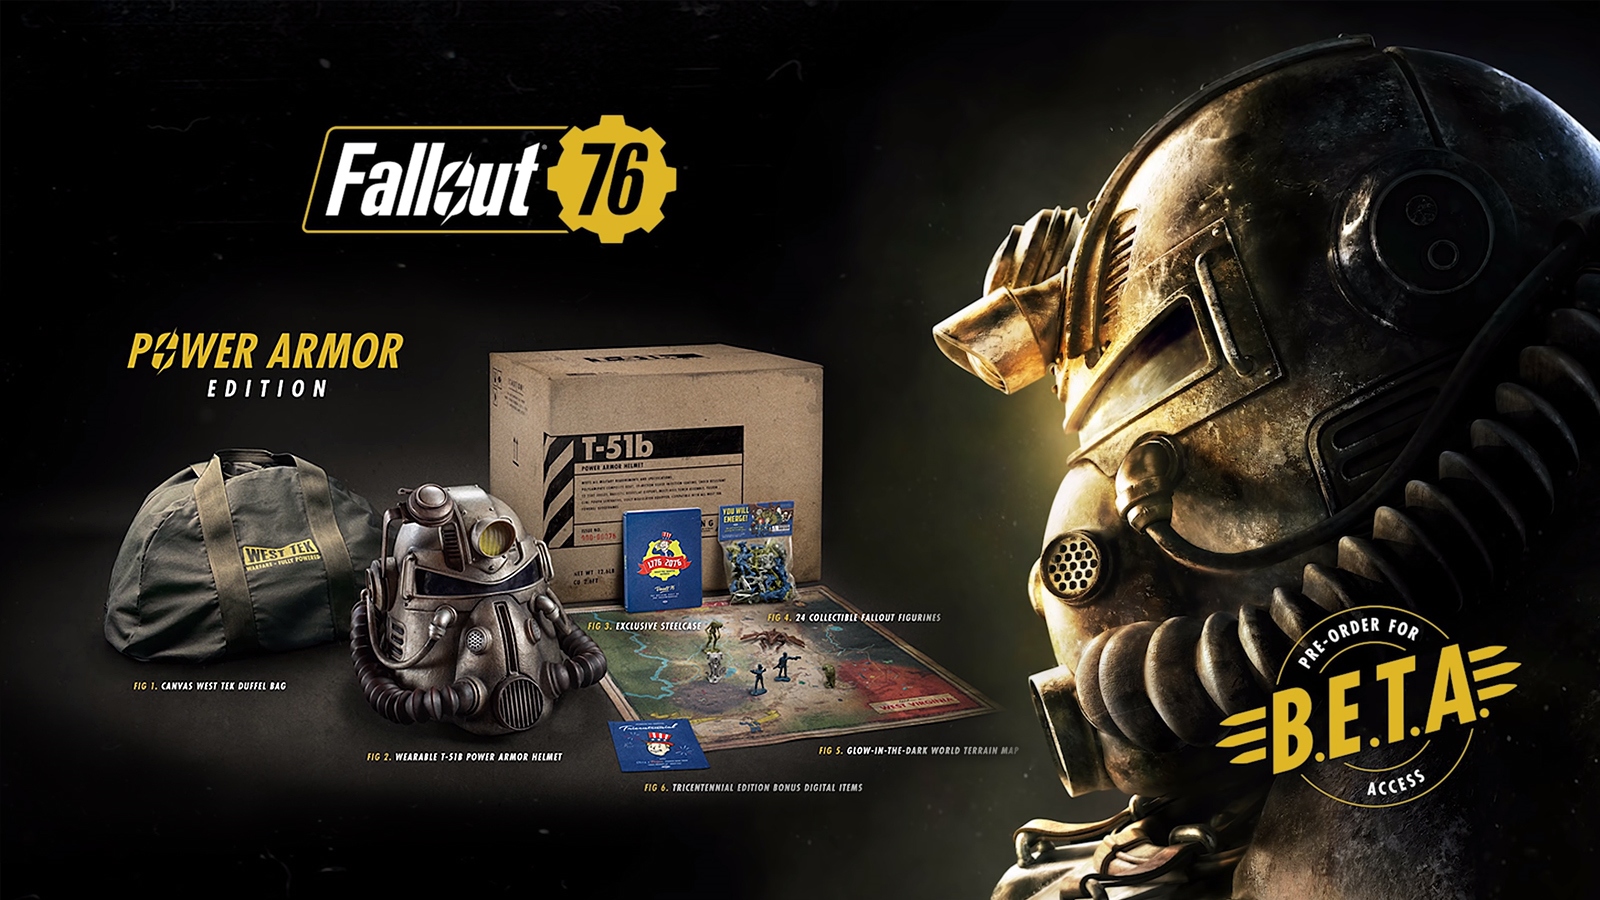 Fallout 76 Pre-Order Release Date: A Highly Anticipated Game for Fans